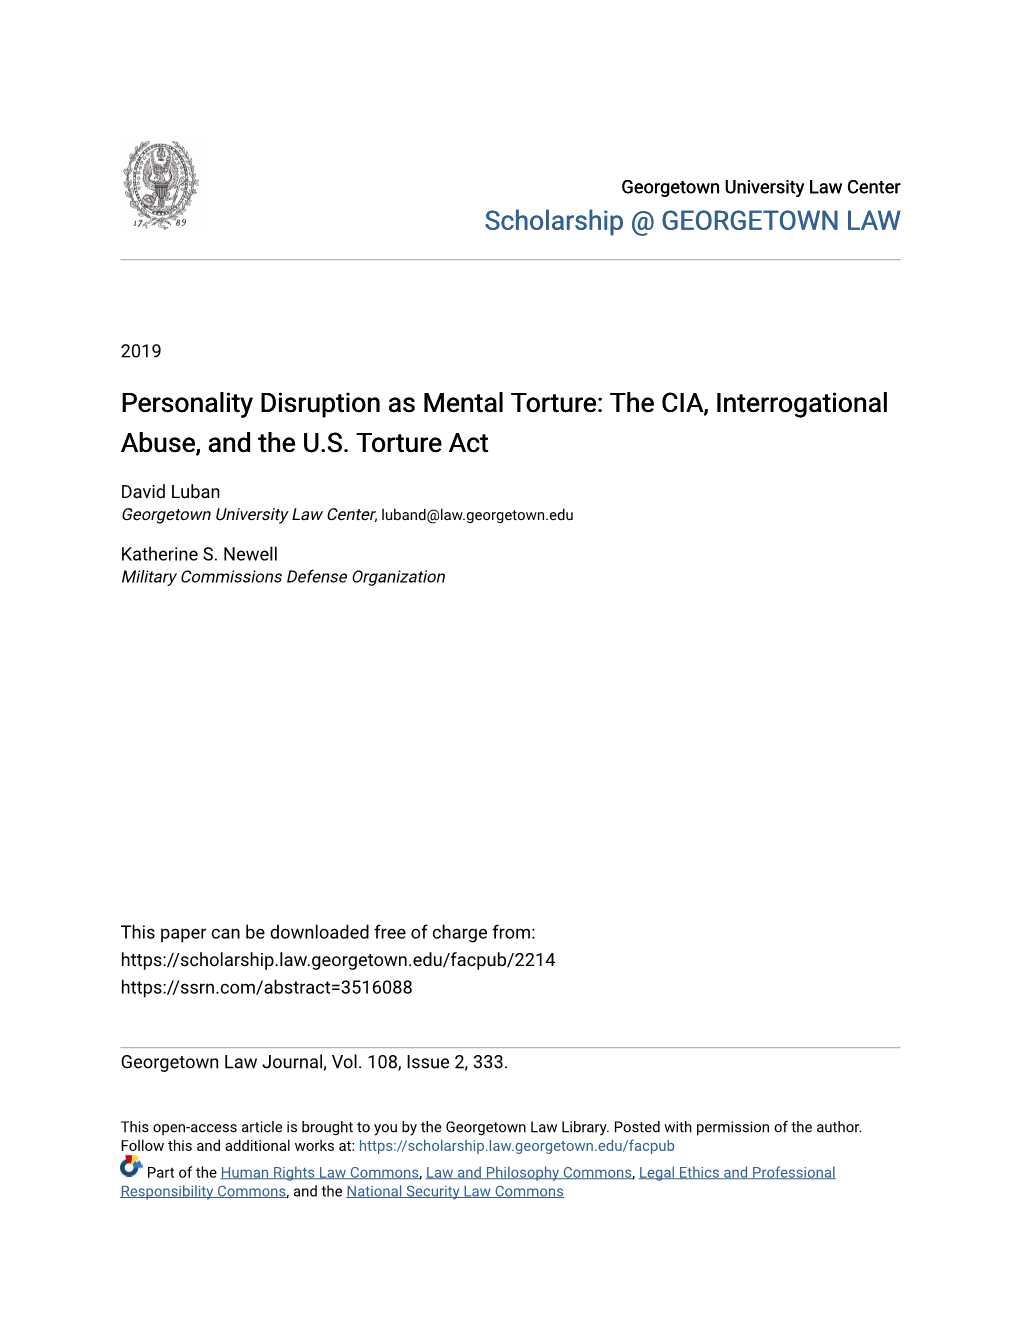 Personality Disruption As Mental Torture: the CIA, Interrogational Abuse, and the U.S